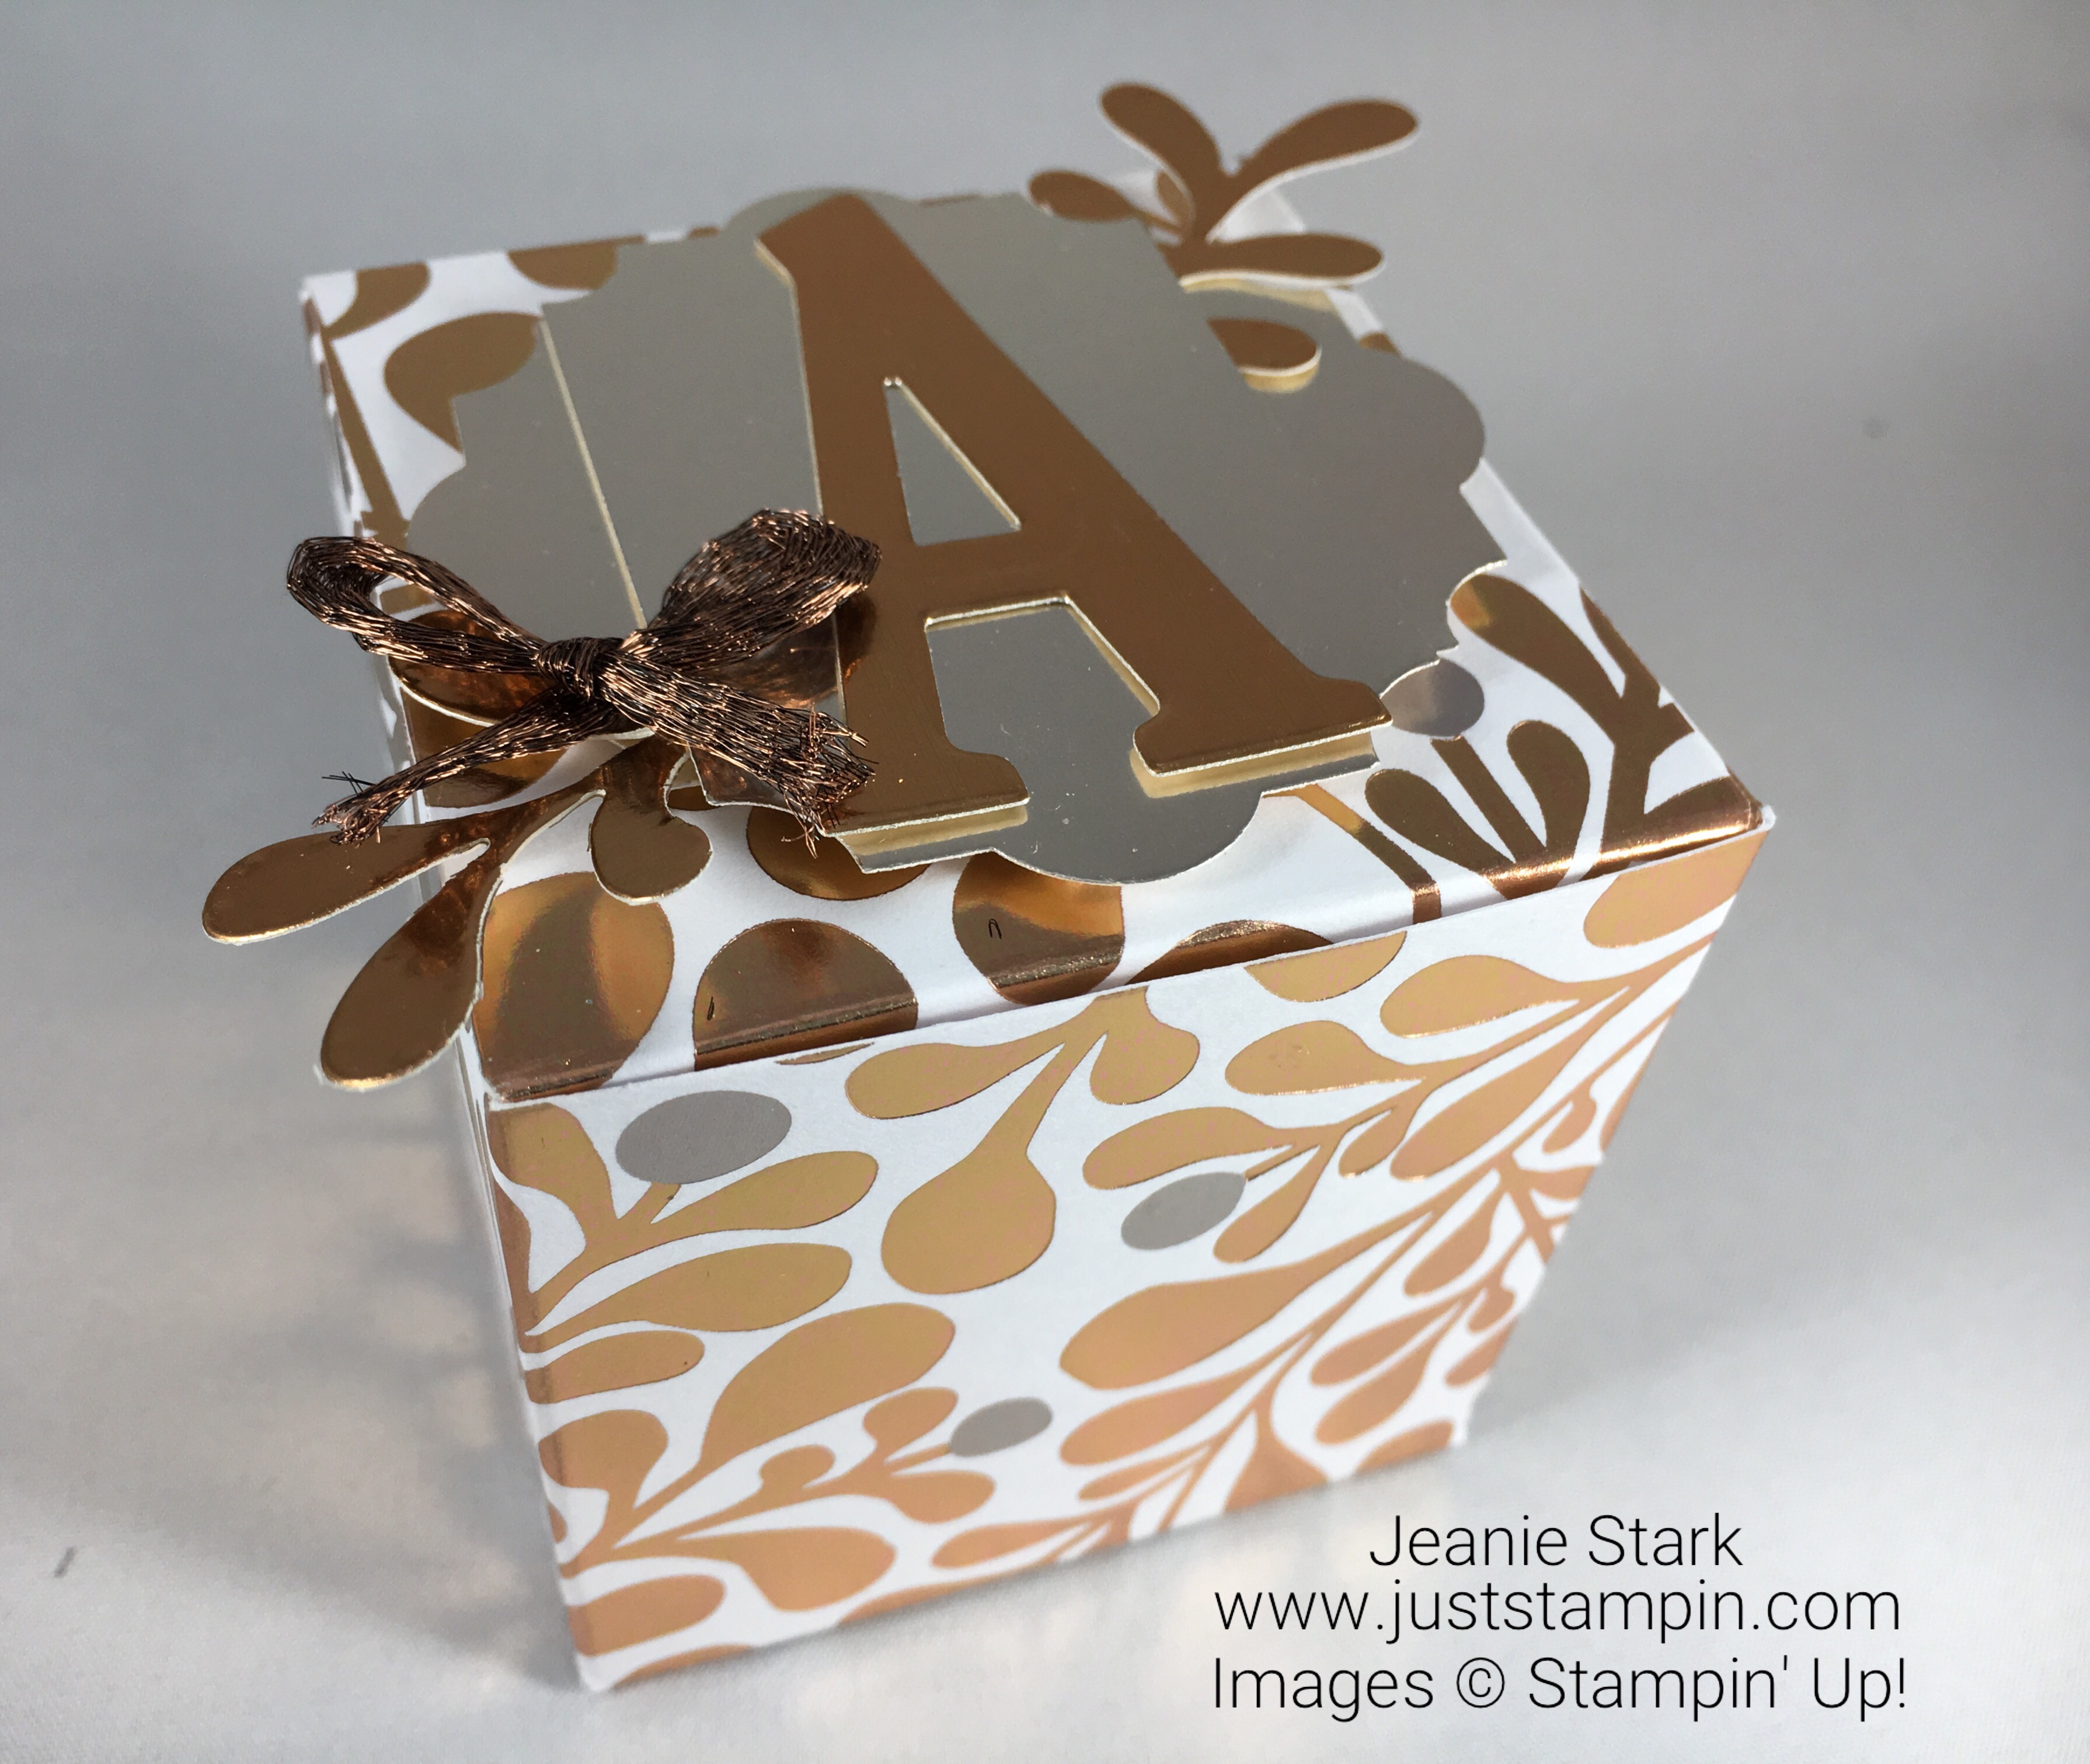 Stampin Up Year of Cheer and Merry Little Labels gift box idea - Jeanie Stark StampinUp